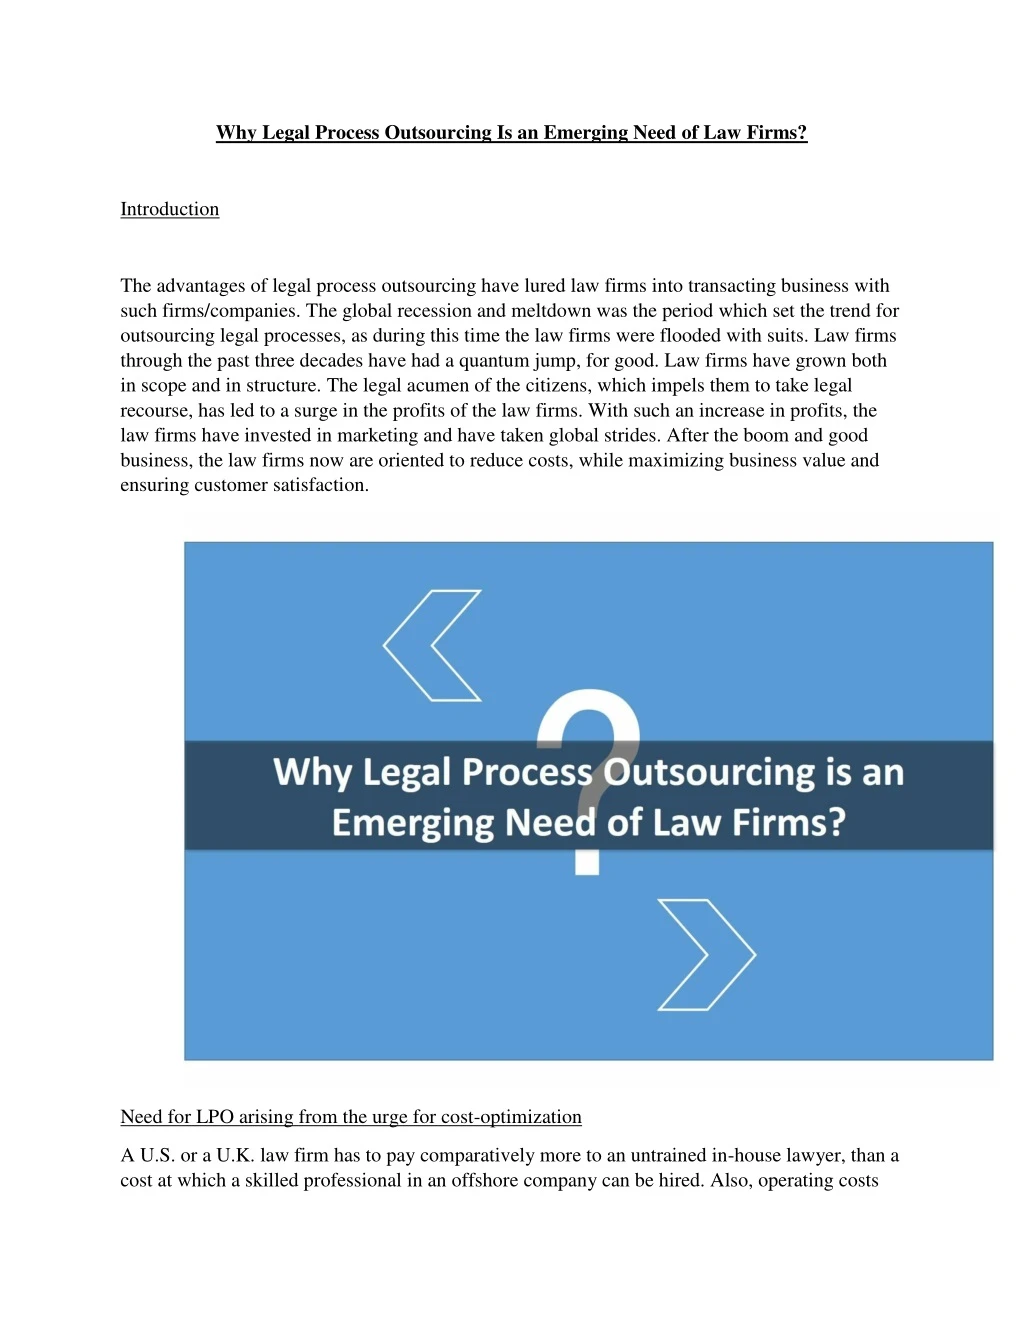 why legal process outsourcing is an emerging need